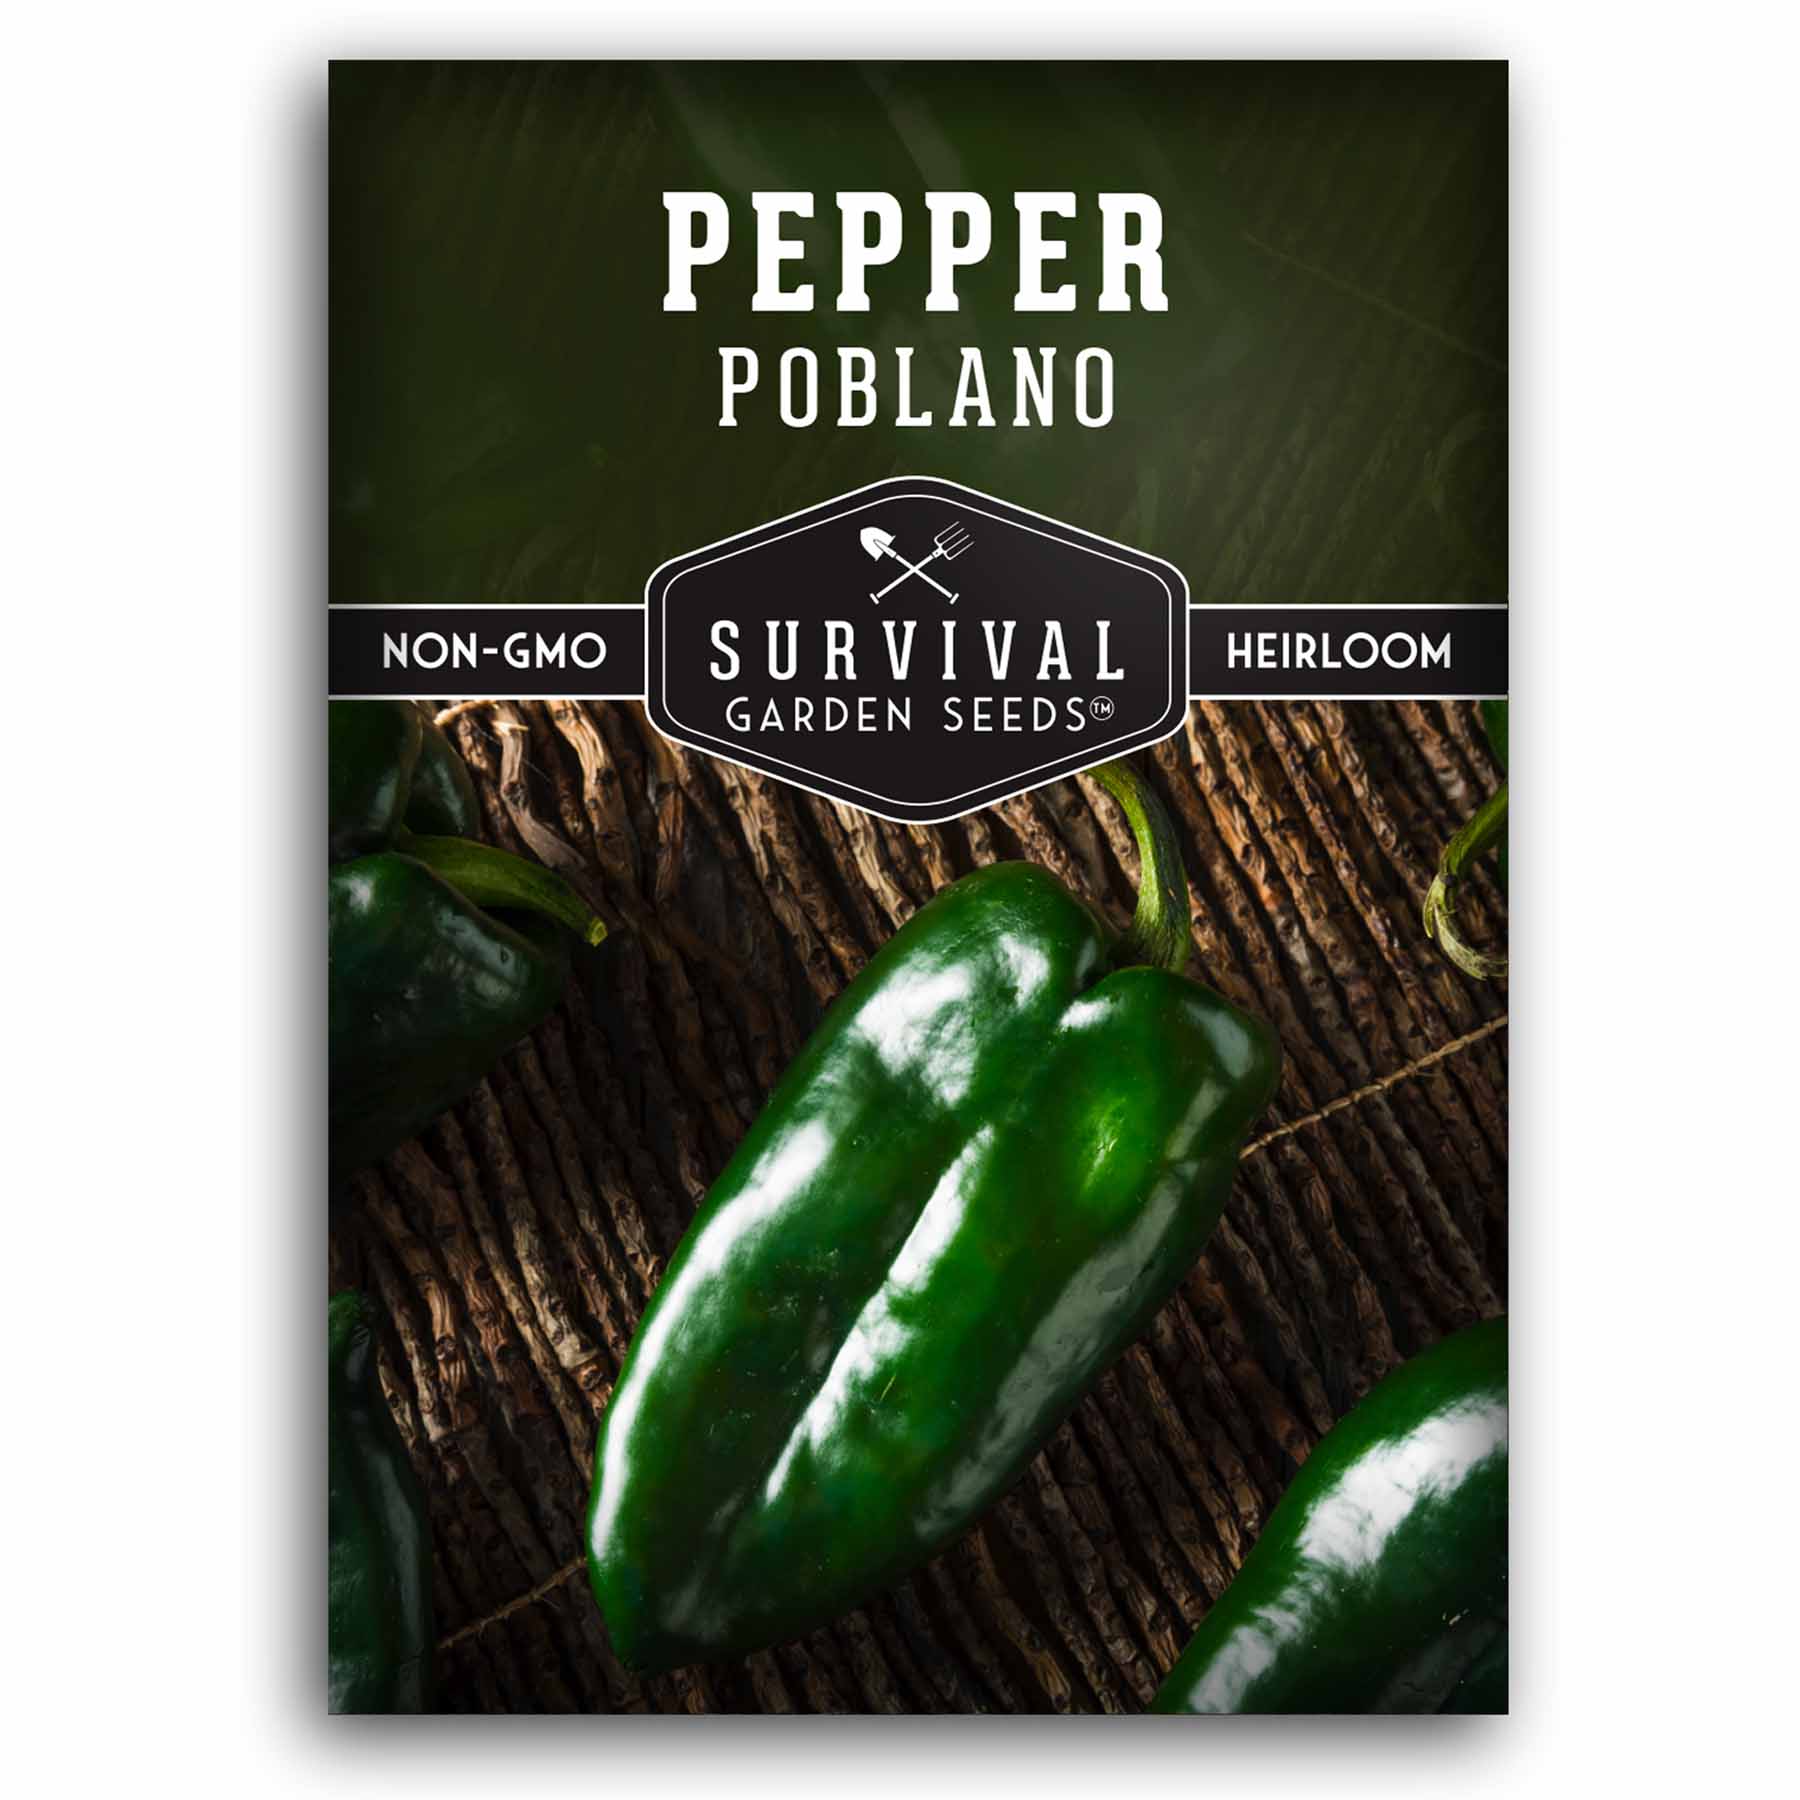 1 packet of Poblano Pepper seeds